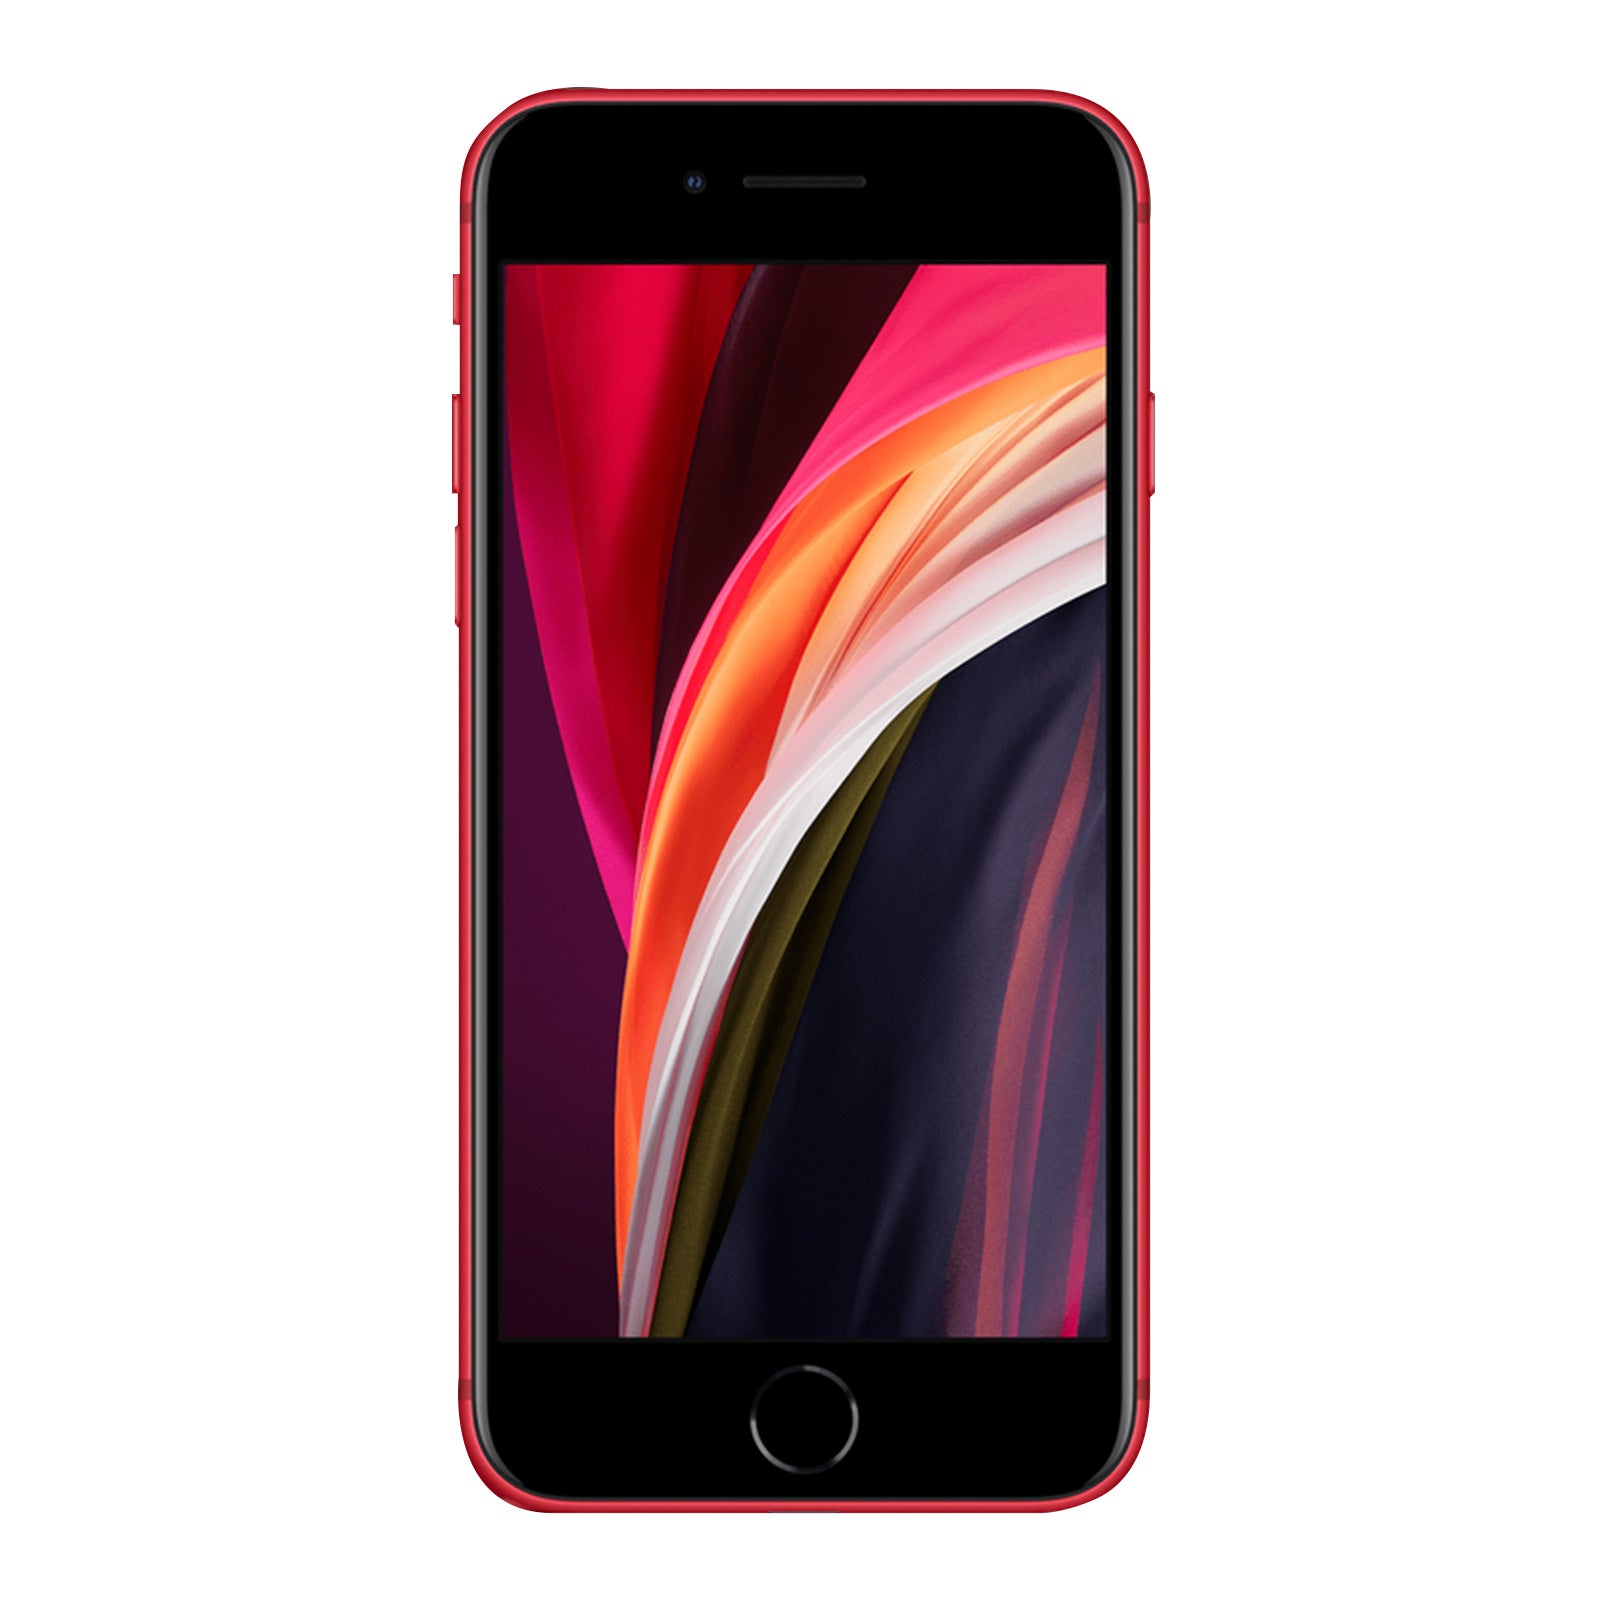 Apple iPhone SE 2nd Gen 128GB Product Red Good T-Mobile